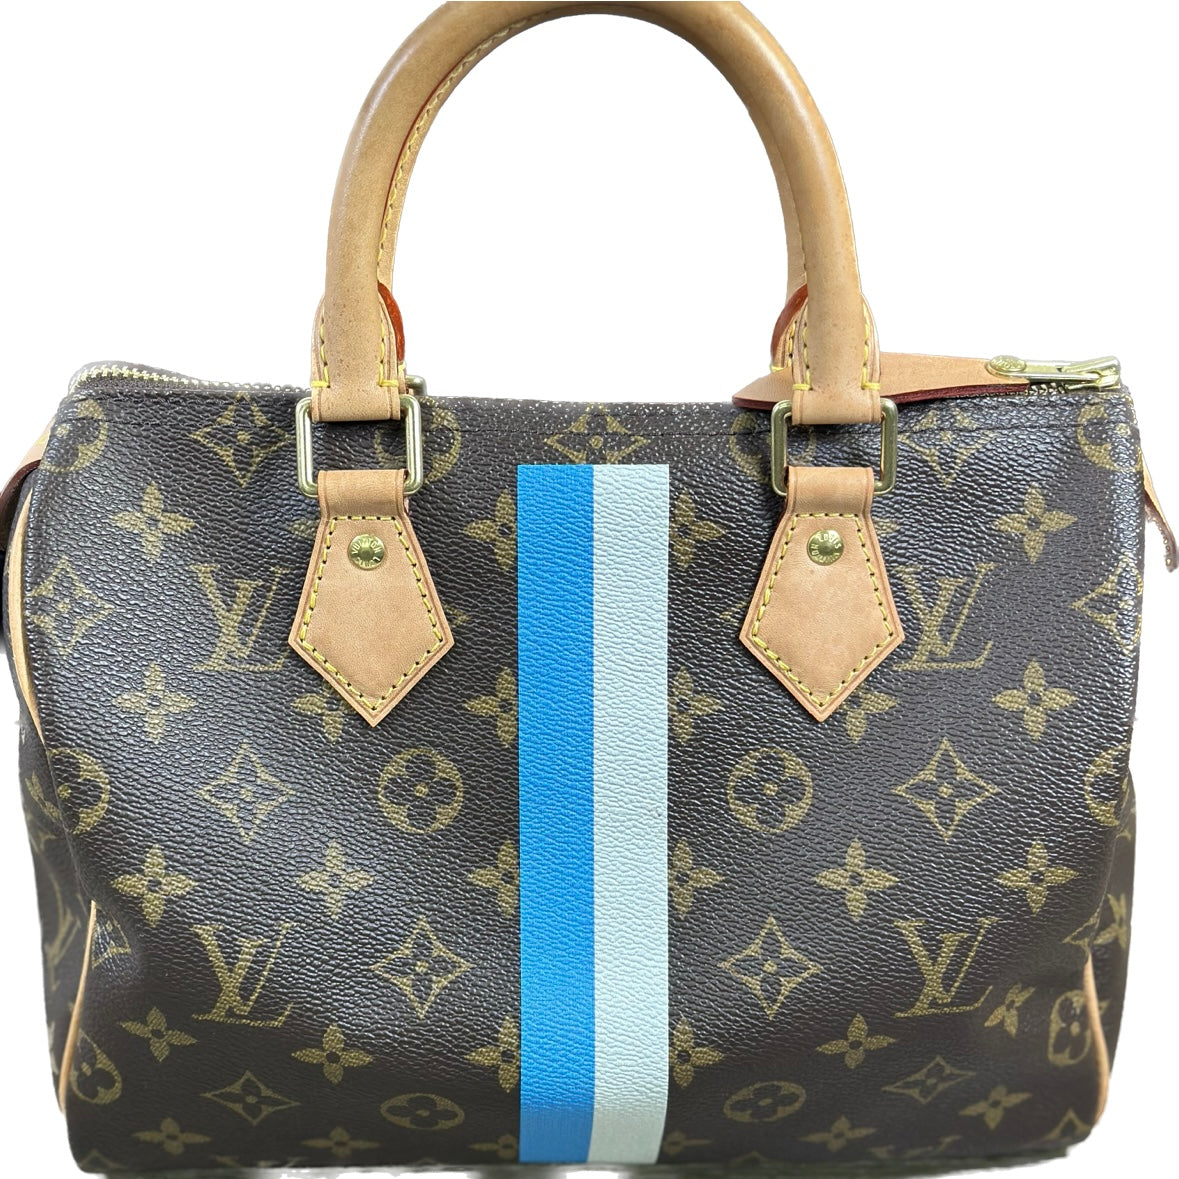 Louis Vuitton Louis Vuitton Monogram My Lv Heritage Speedy Bandouliere 35  Shoulder Bag Added Insert Preowned on SALE